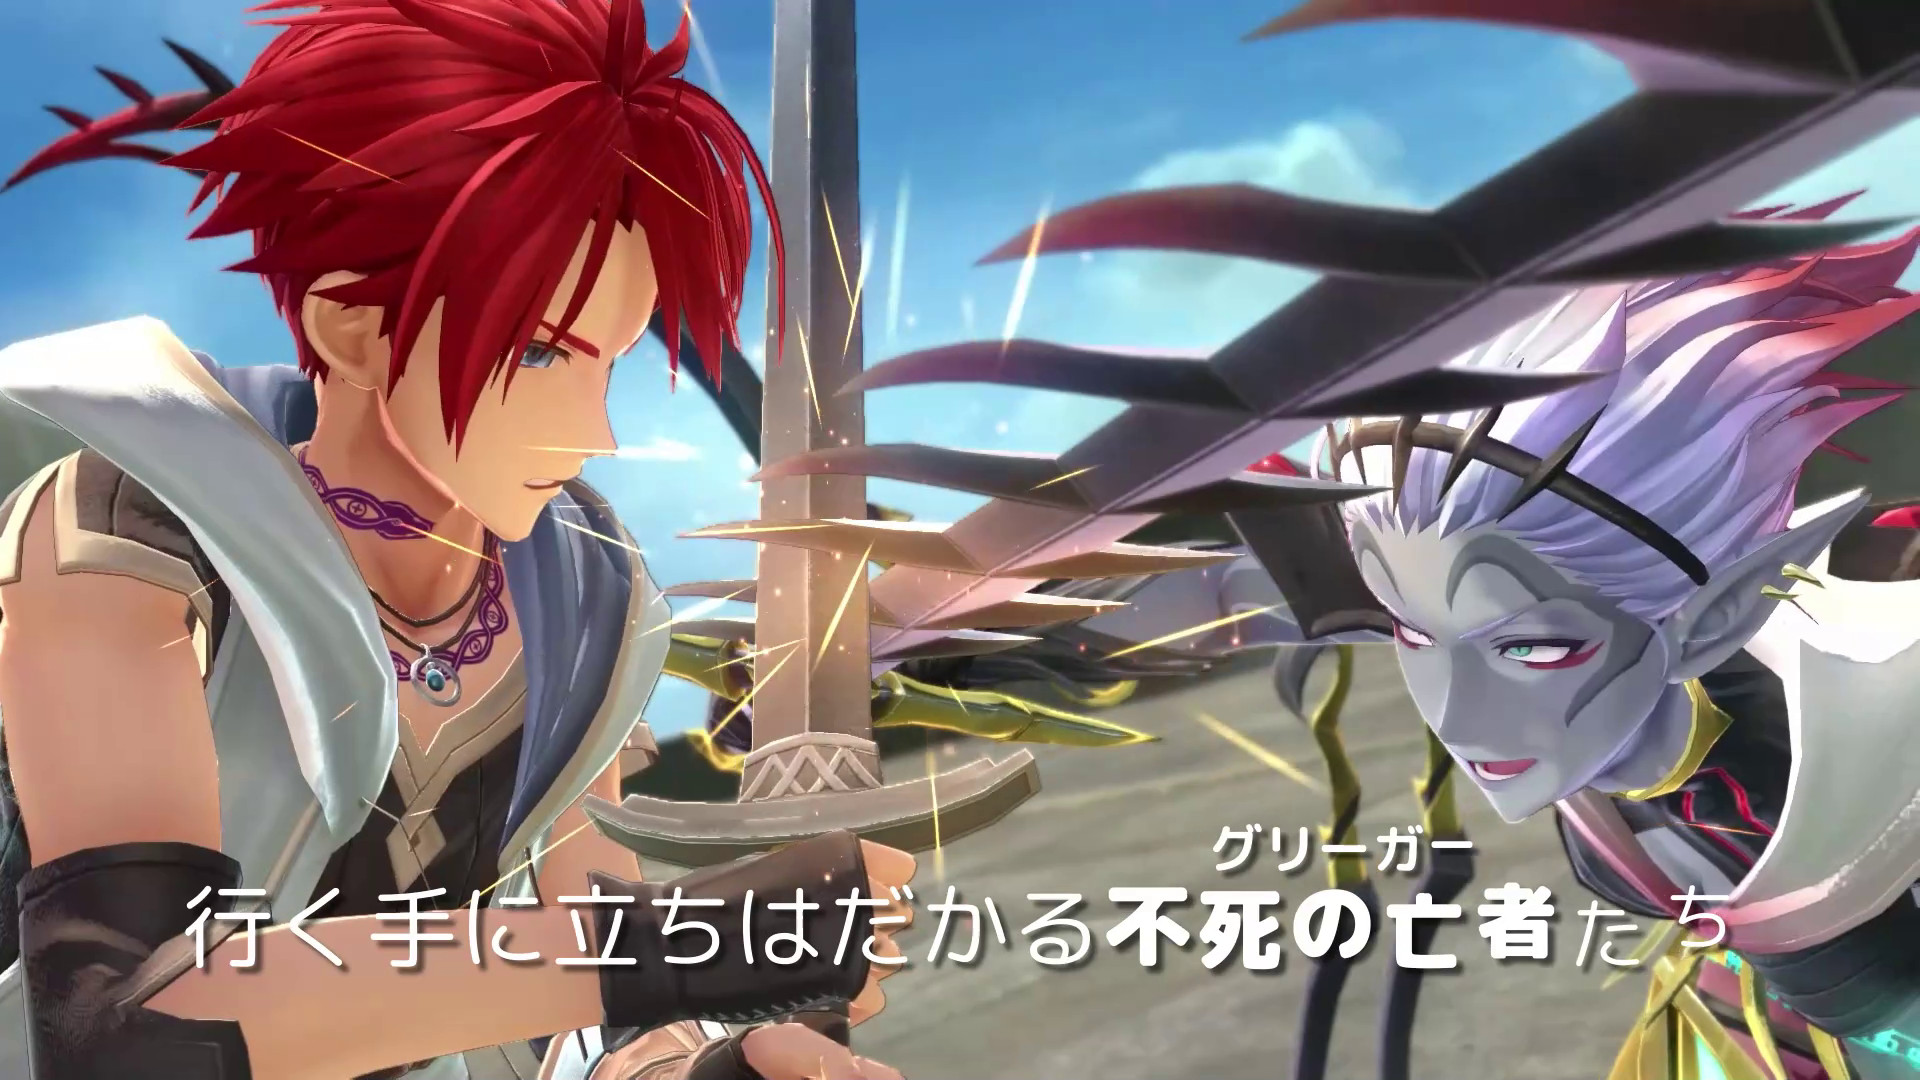 Ys X Nordics Unveils Official Gameplay Trailer - QooApp News